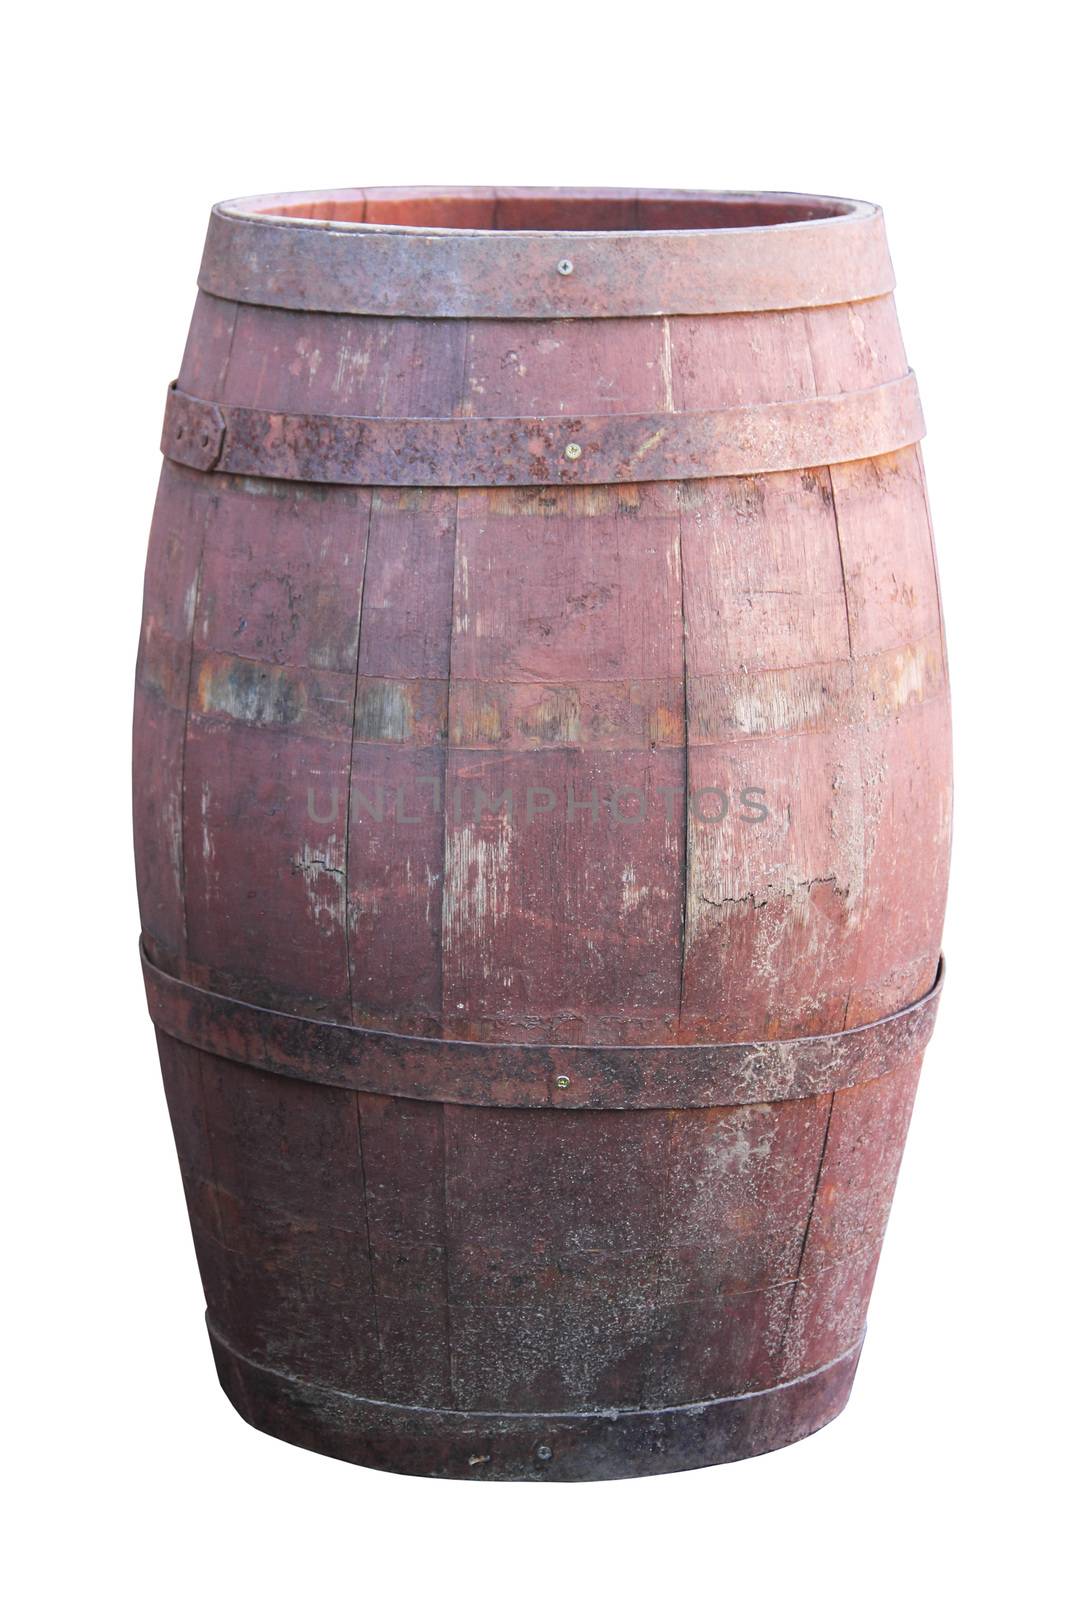 Old wooden Barrel isolated on white background